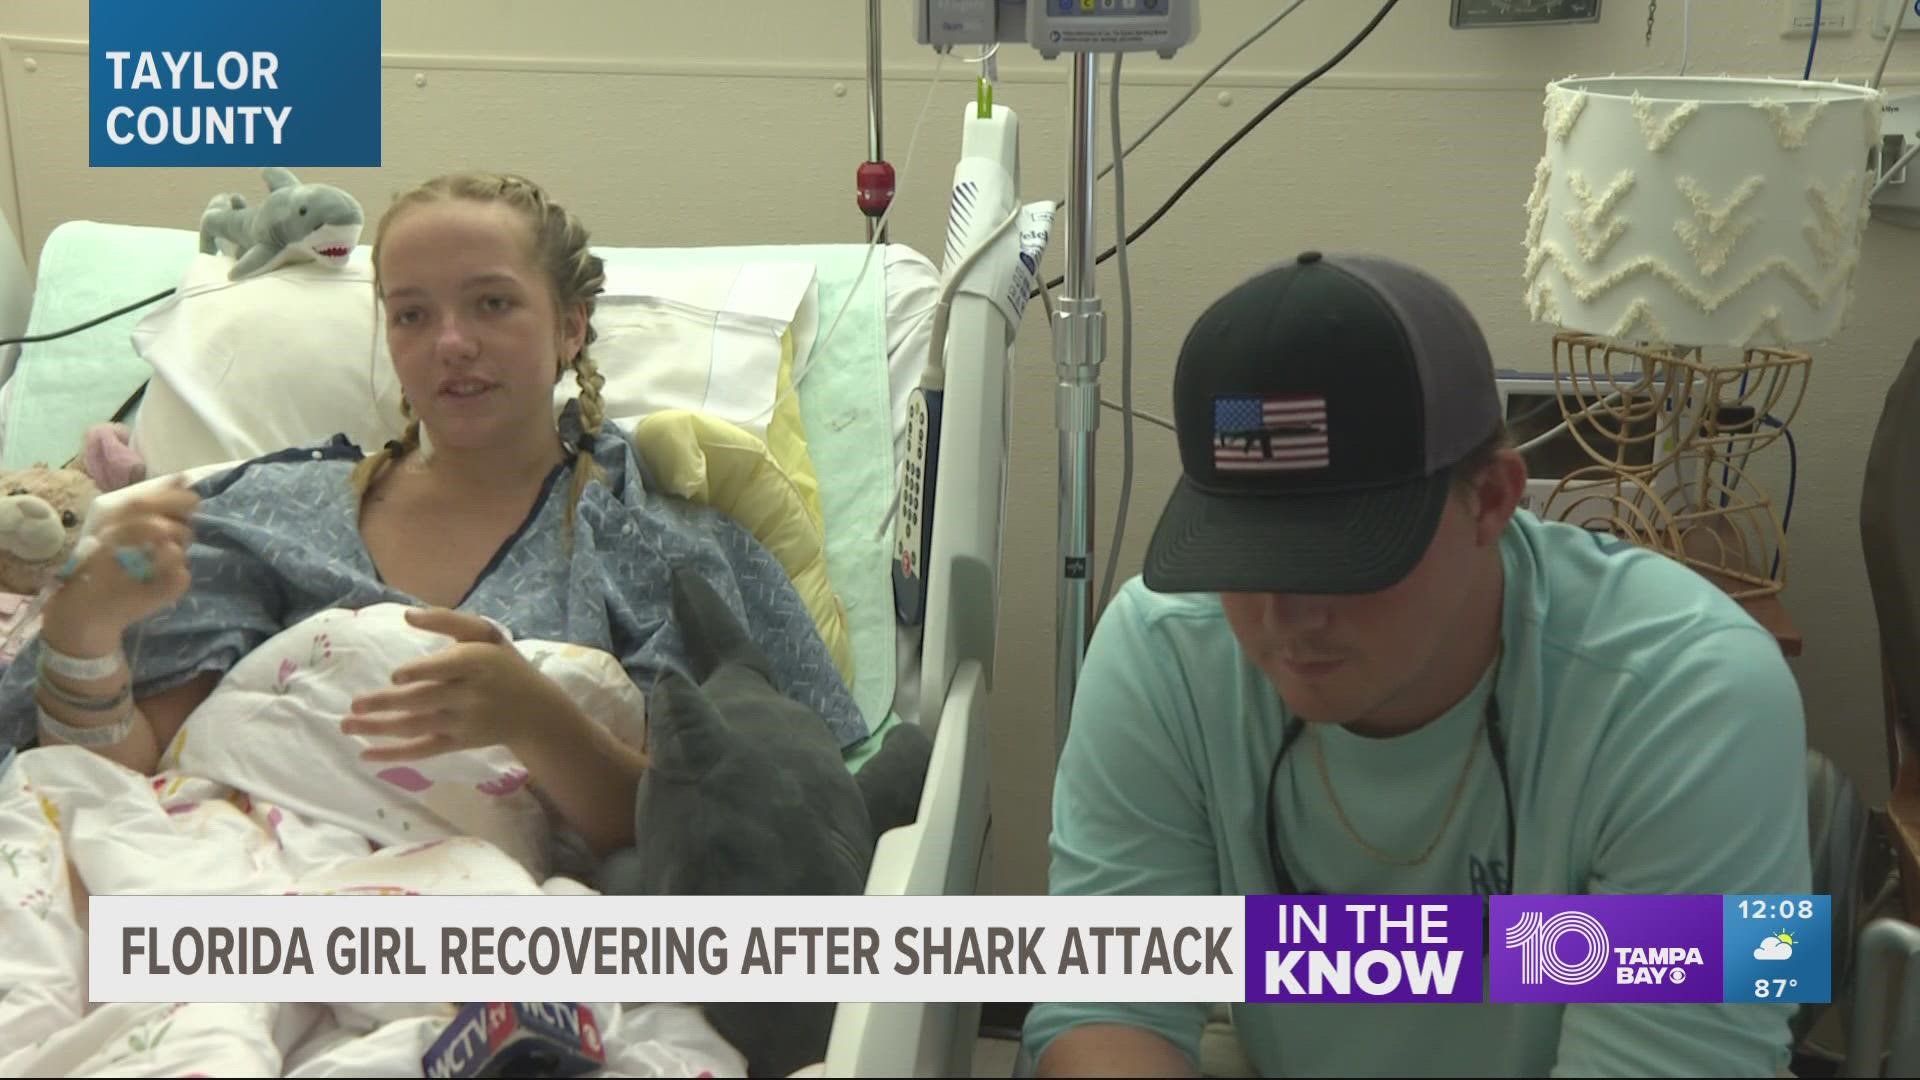 The 17-year-old was attacked by the shark while scalloping in about 5-6 feet of water with her family.